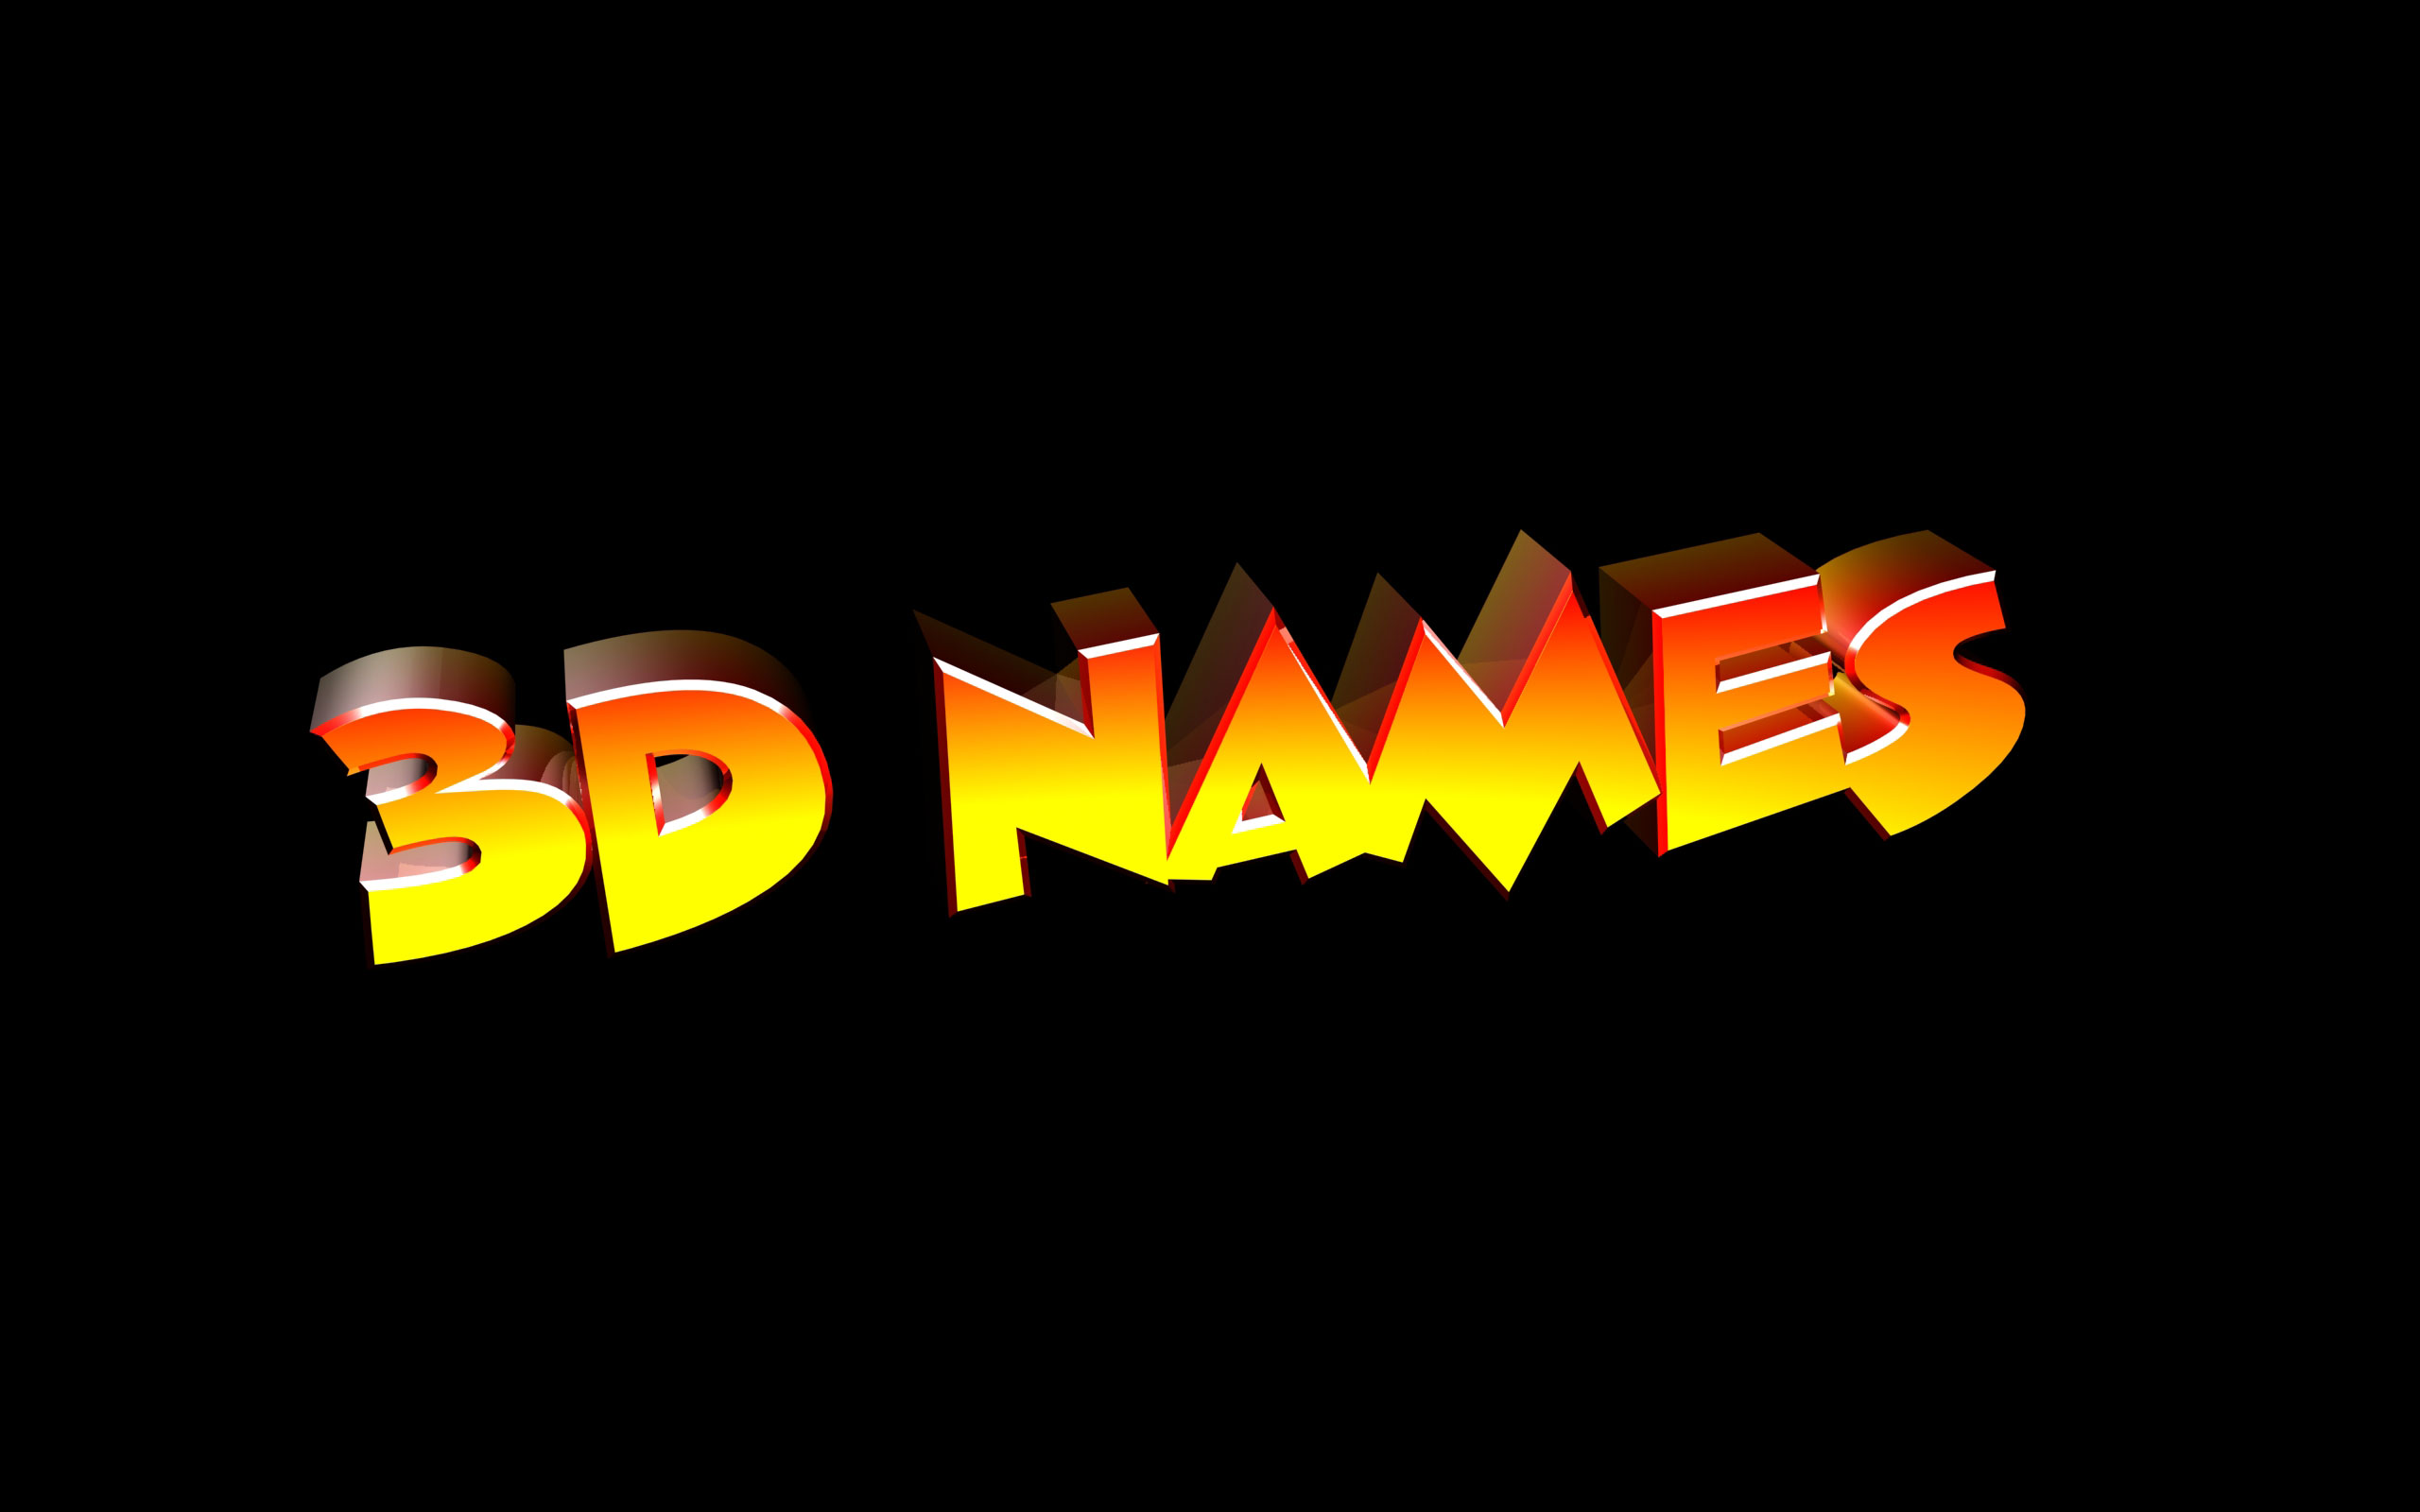 3D Name Wallpapers submited images